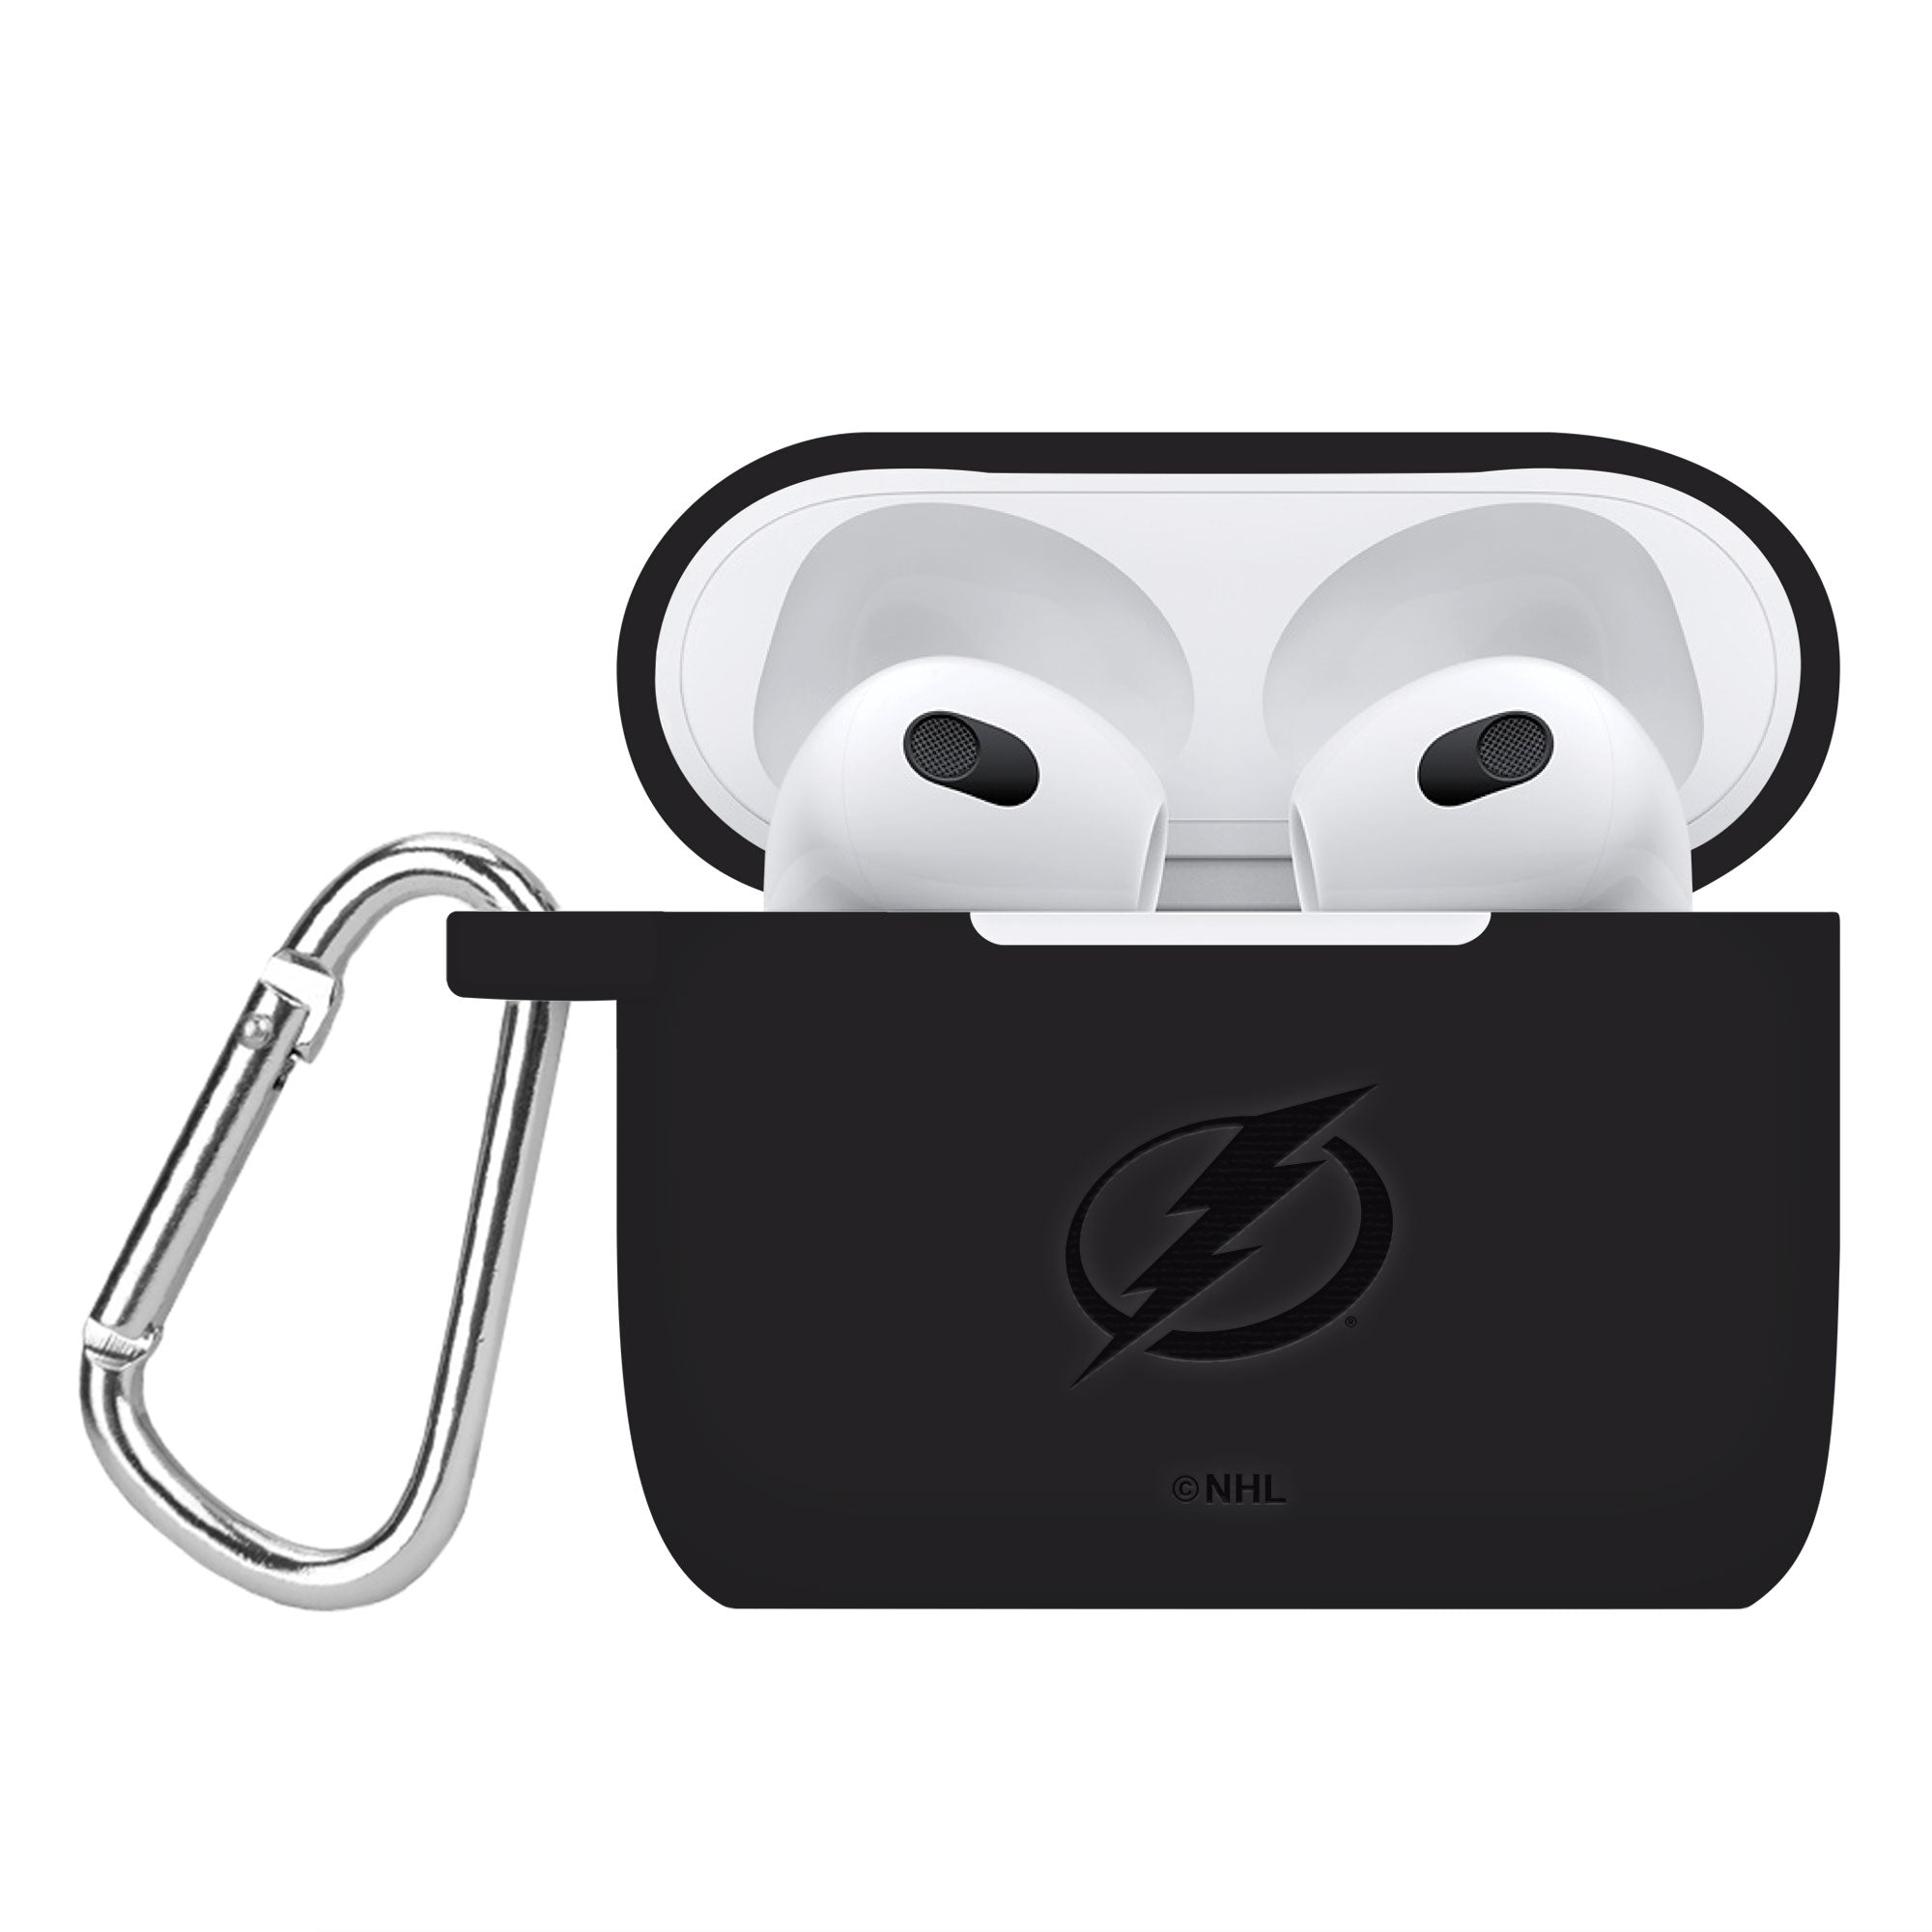 Tampa Bay Lightning Engraved Apple AirPod Gen 3 Case Cover